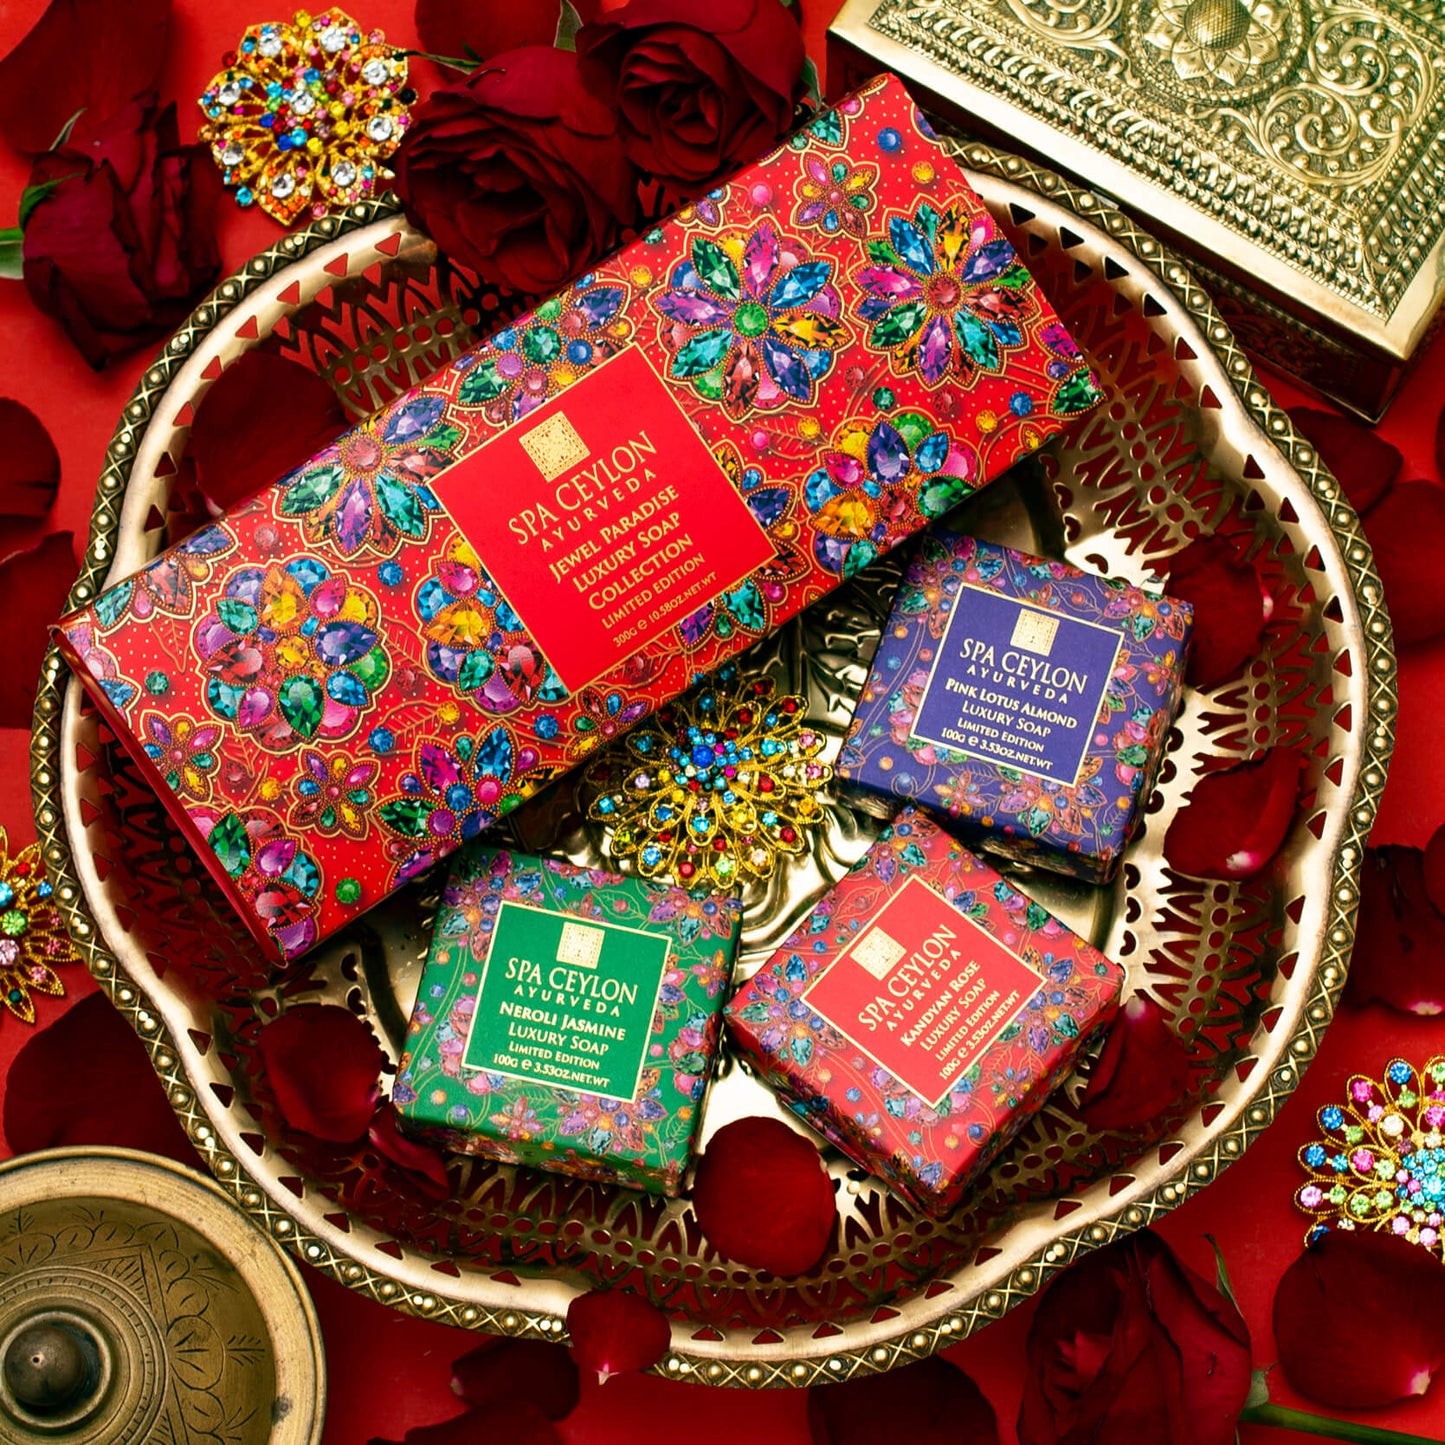 Jewel Paradise – 300g Luxury Soap Collection